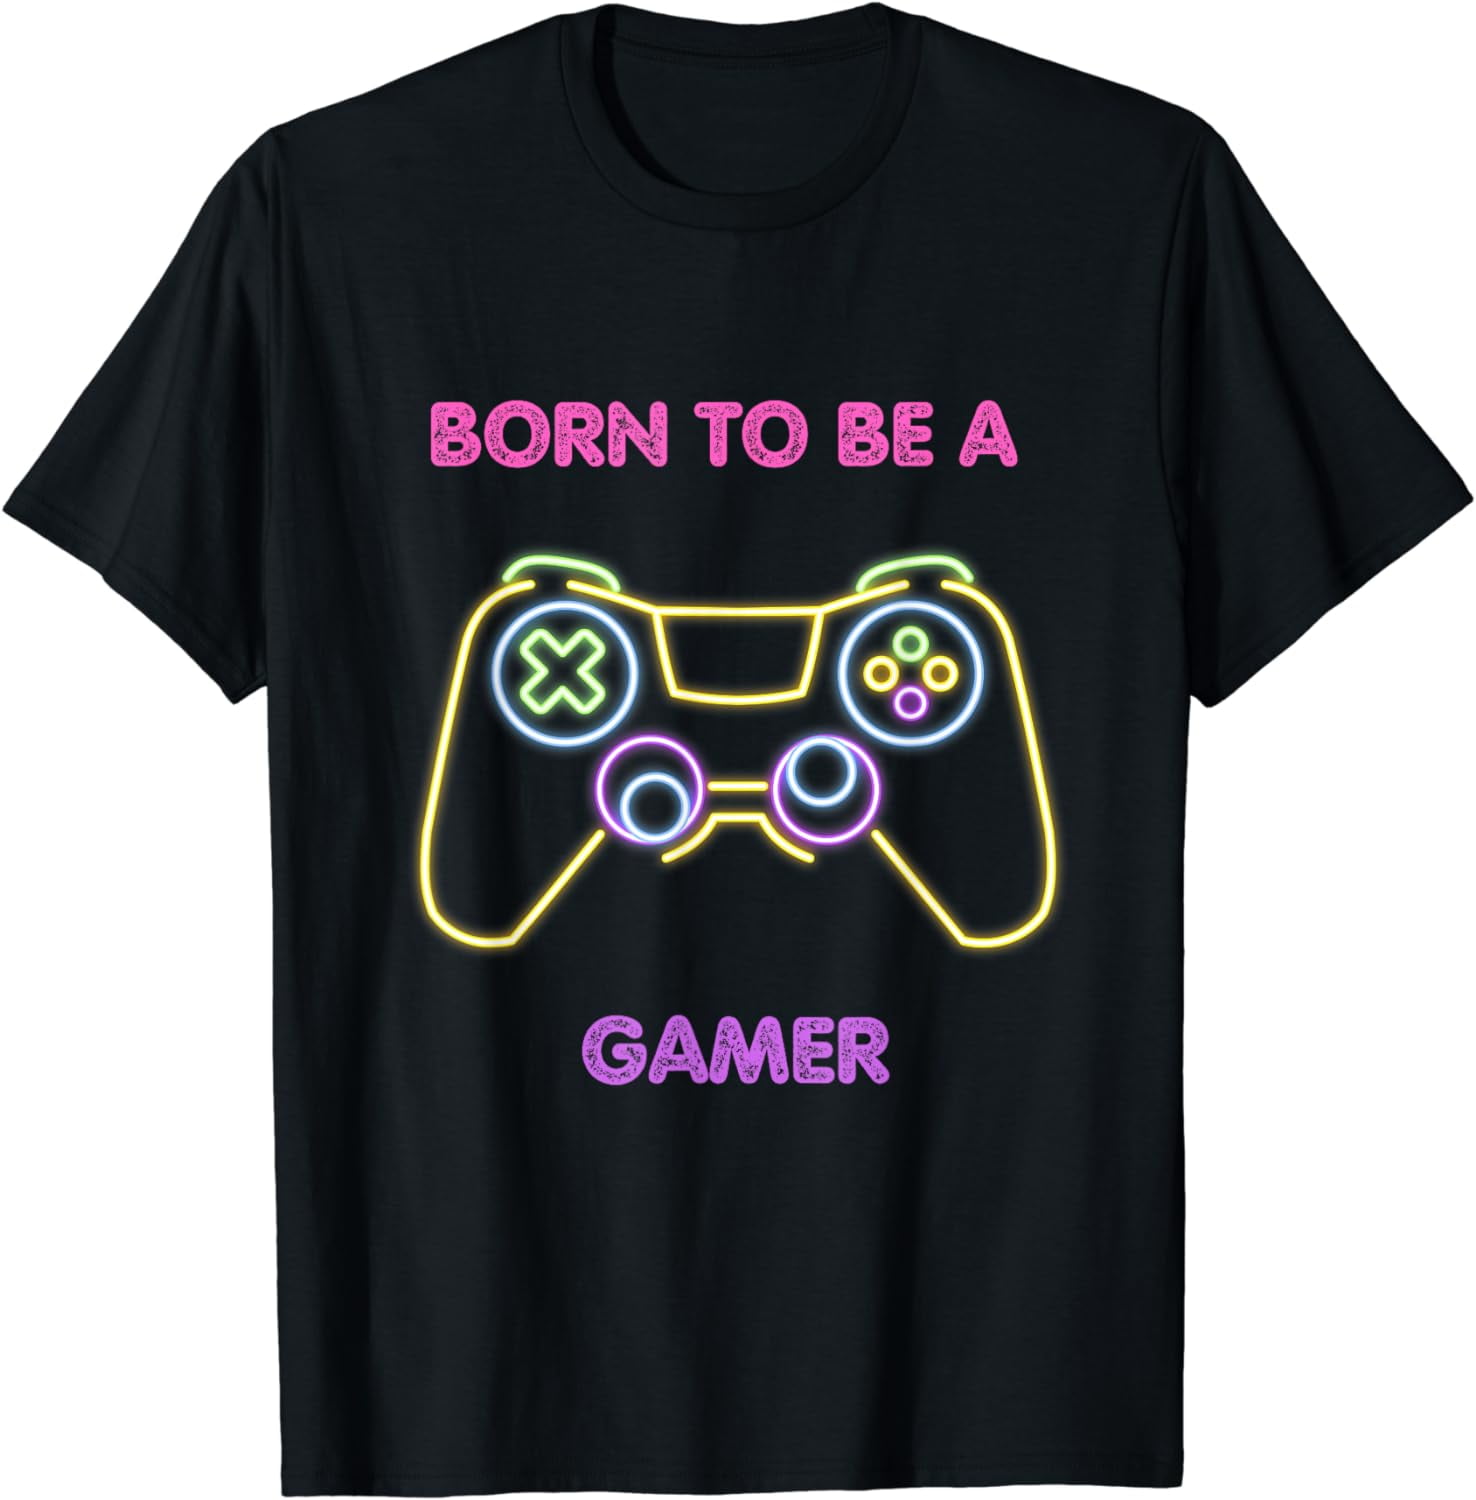 Funny Console Gaming Apparel Born To Be A Gamer For Man T-Shirt ...